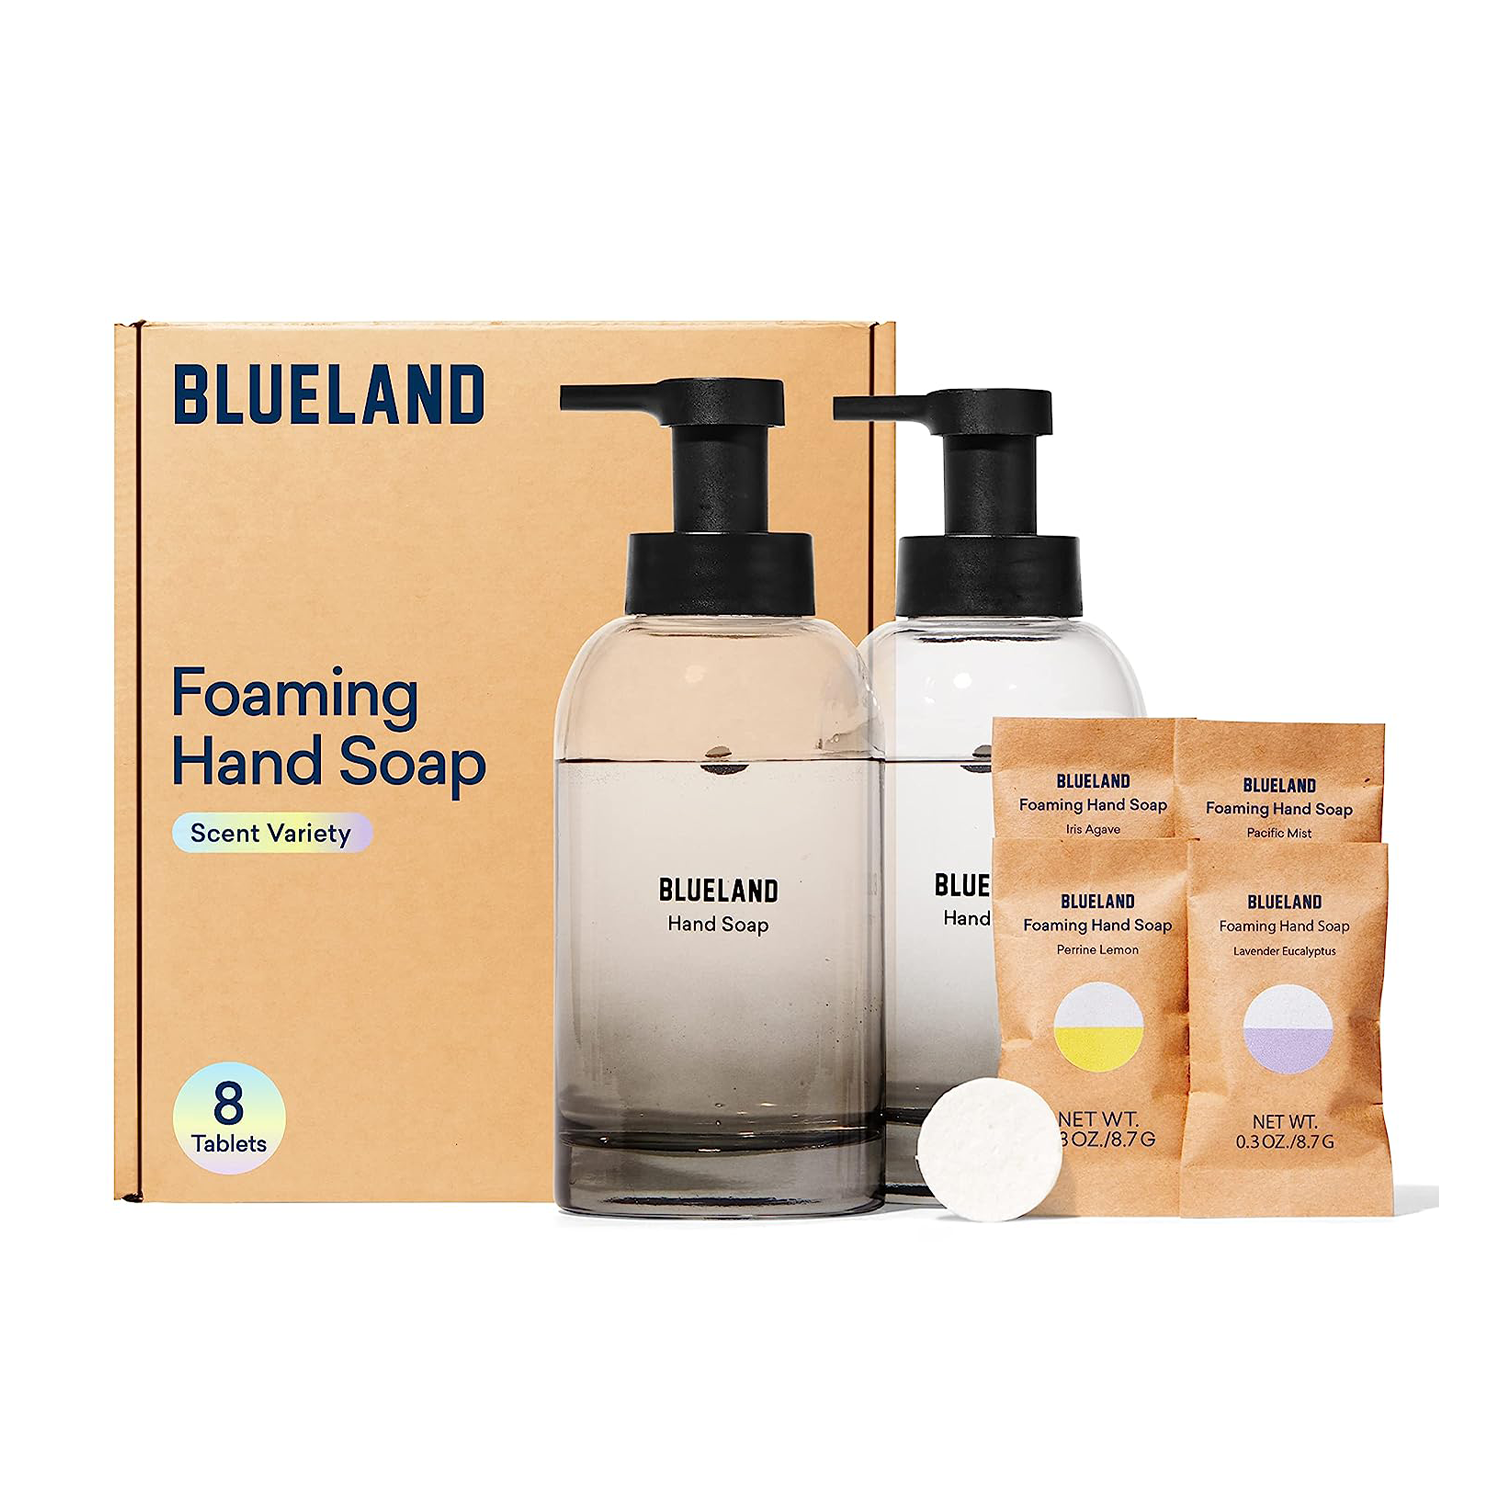 Two Refillable Glass Foaming Hand Soap Dispensers from Blueland